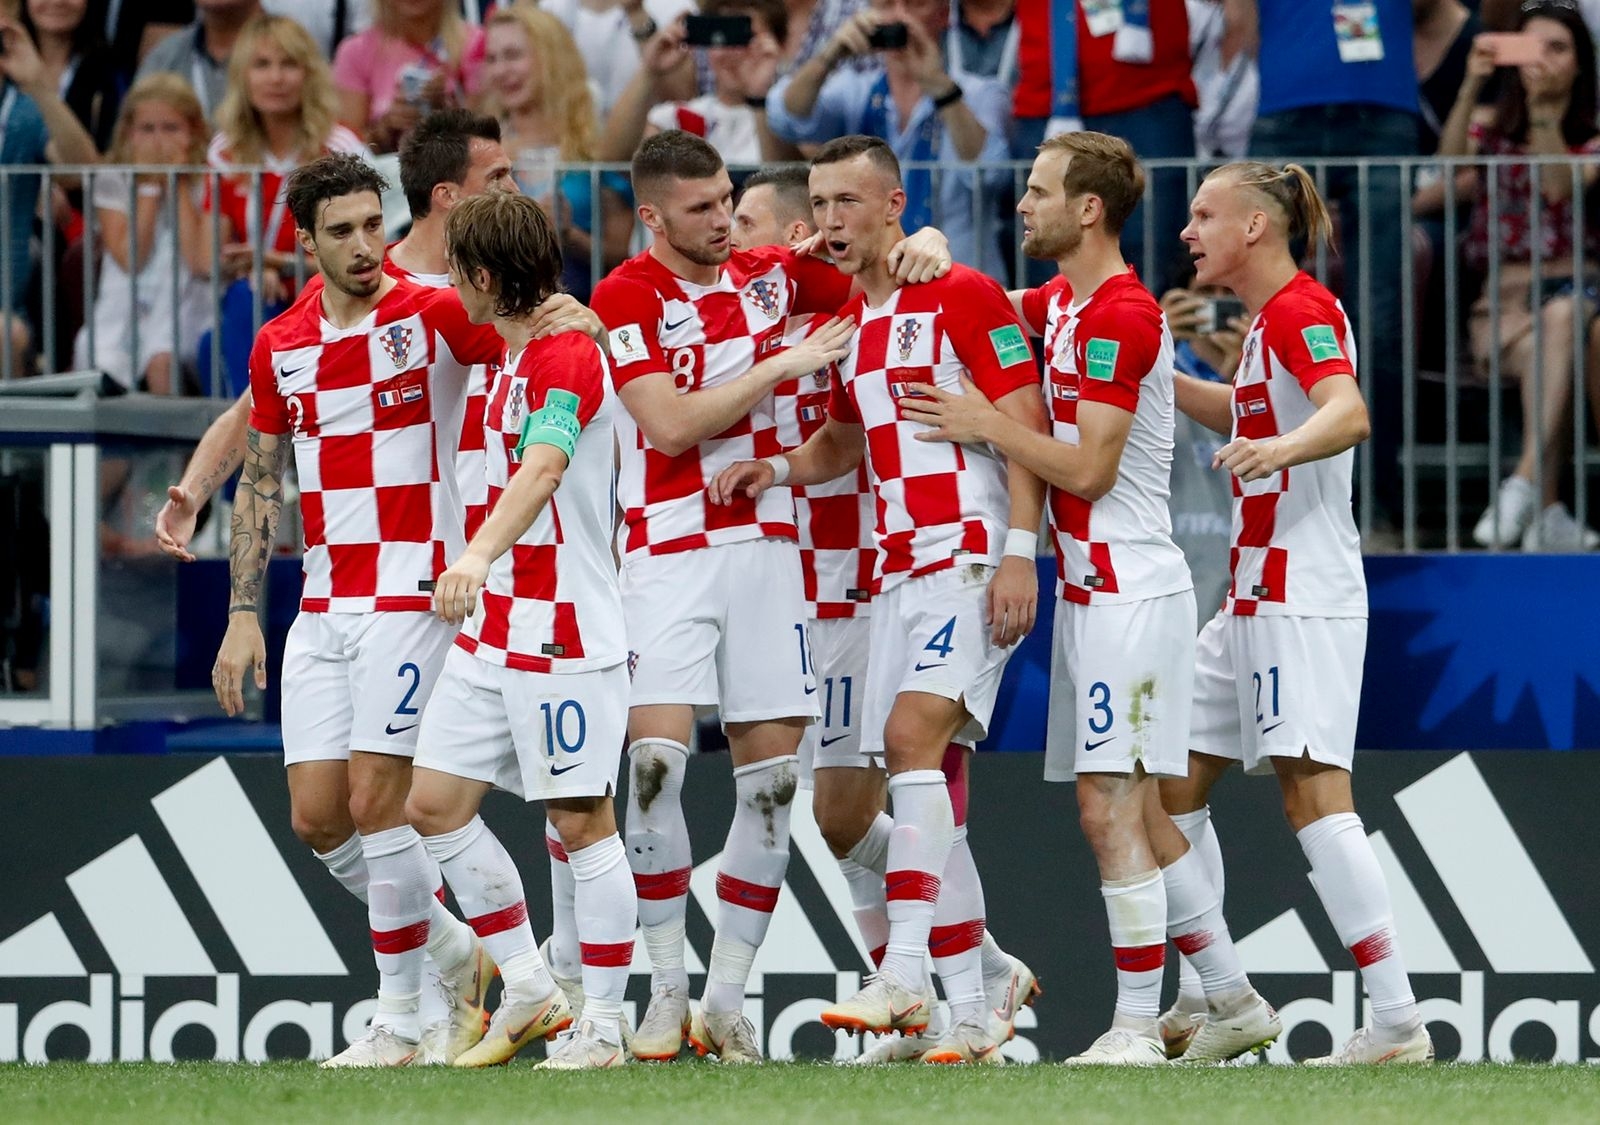 Croatia's Ivan Perisic celebrates with teammates after scoring his side's first goal during the final match between France and Croatia at the 2018 soccer World Cup in the Luzhniki Stadium in Moscow, Russia, Sunday, July 15, 2018. (AP Photo/Petr David Josek)